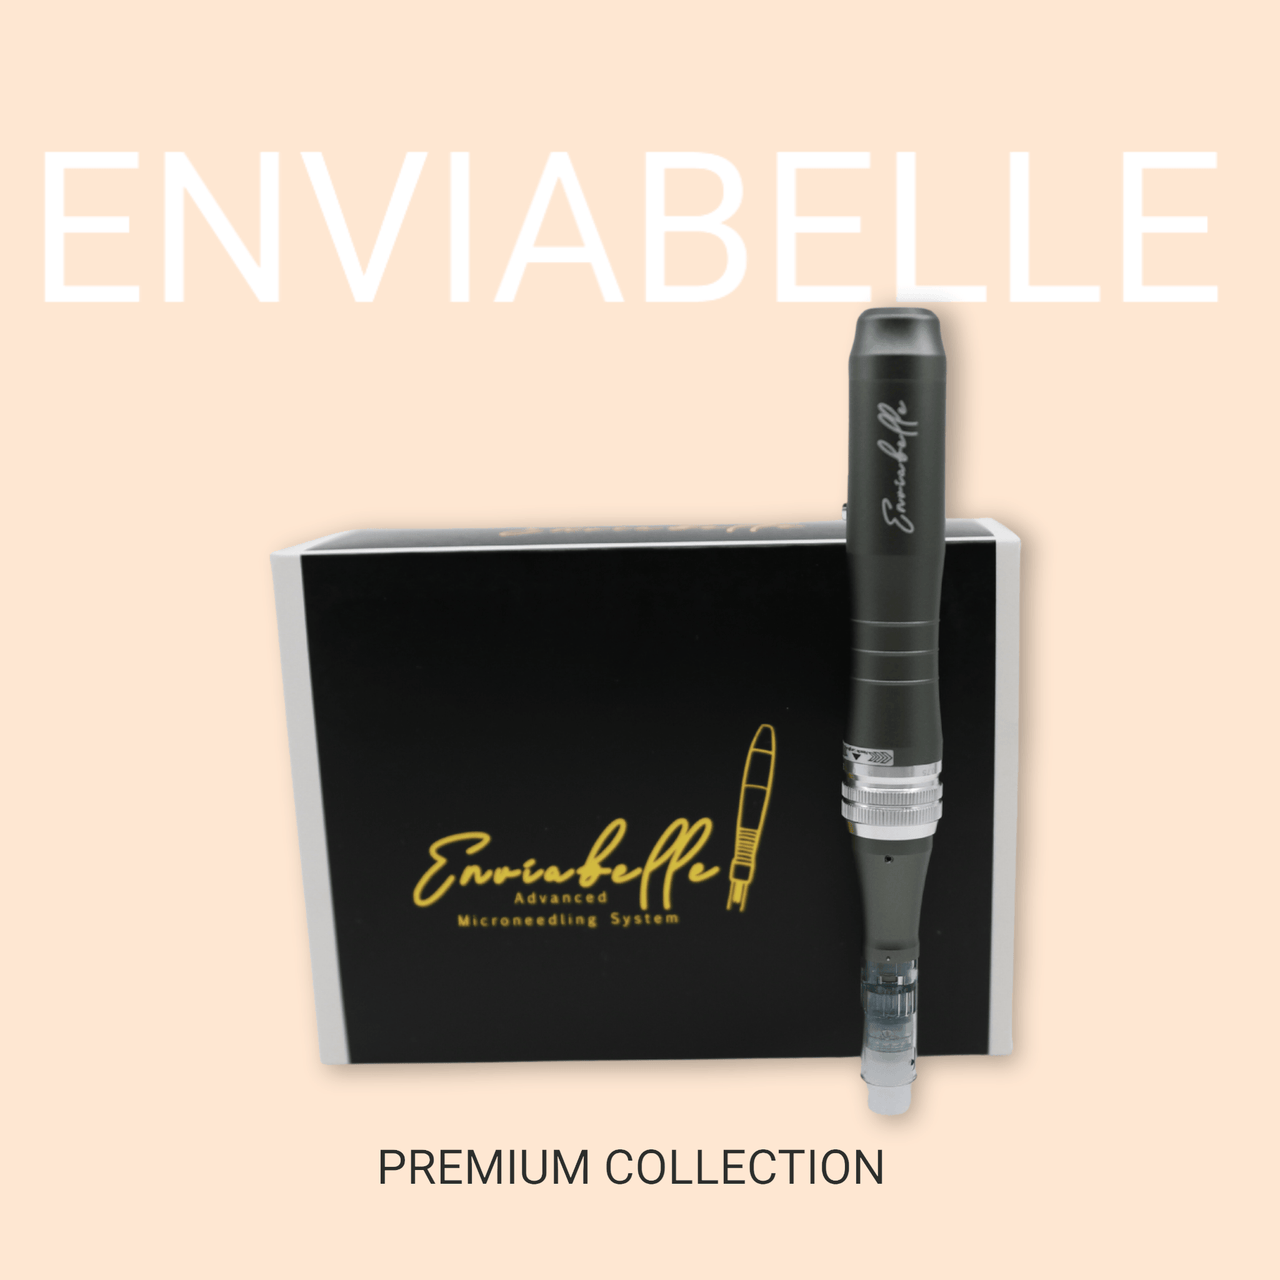 Advanced MicroNeedle System - Enviabelle